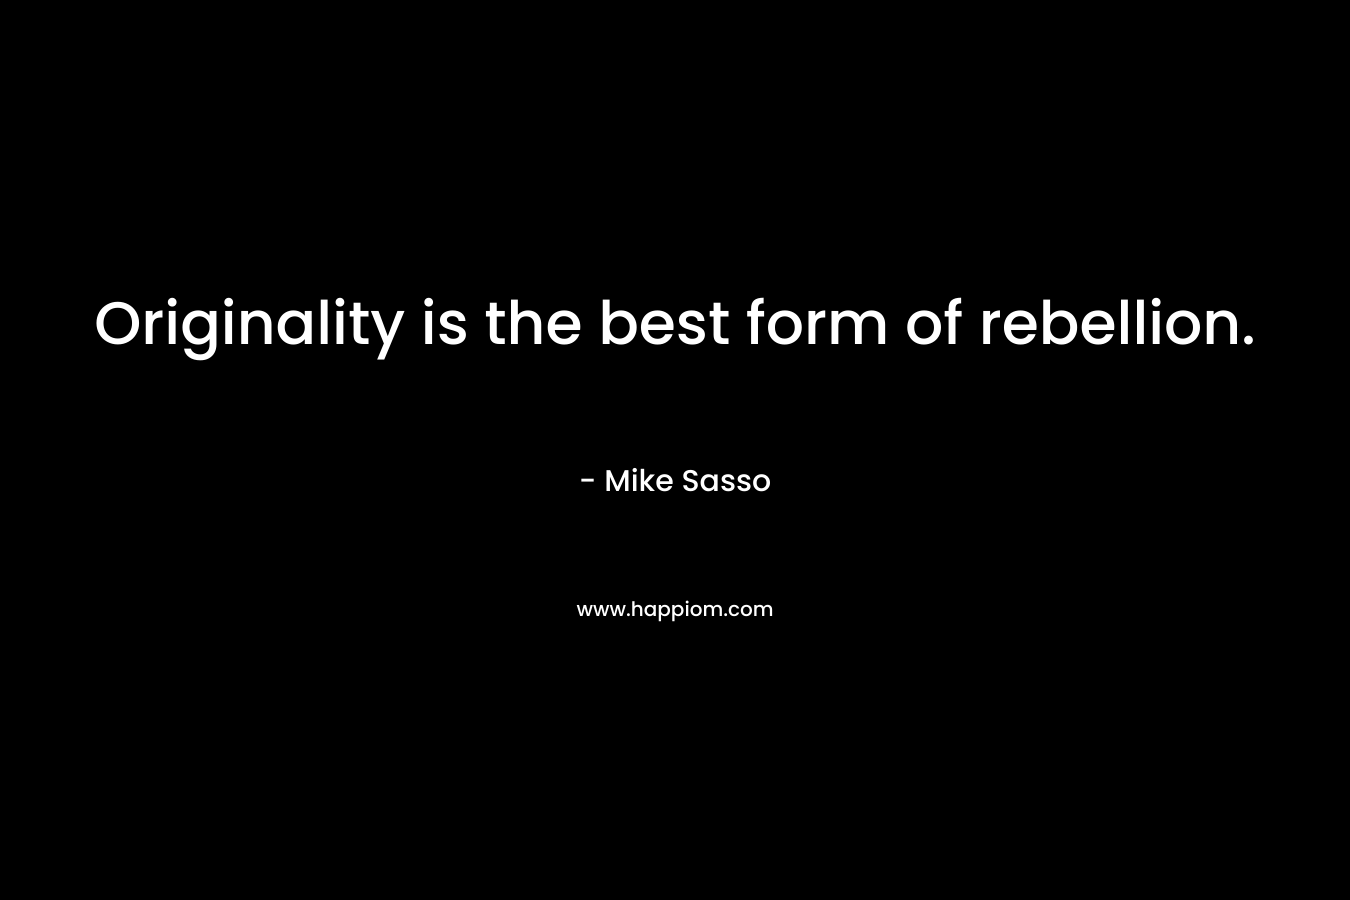 Originality is the best form of rebellion.